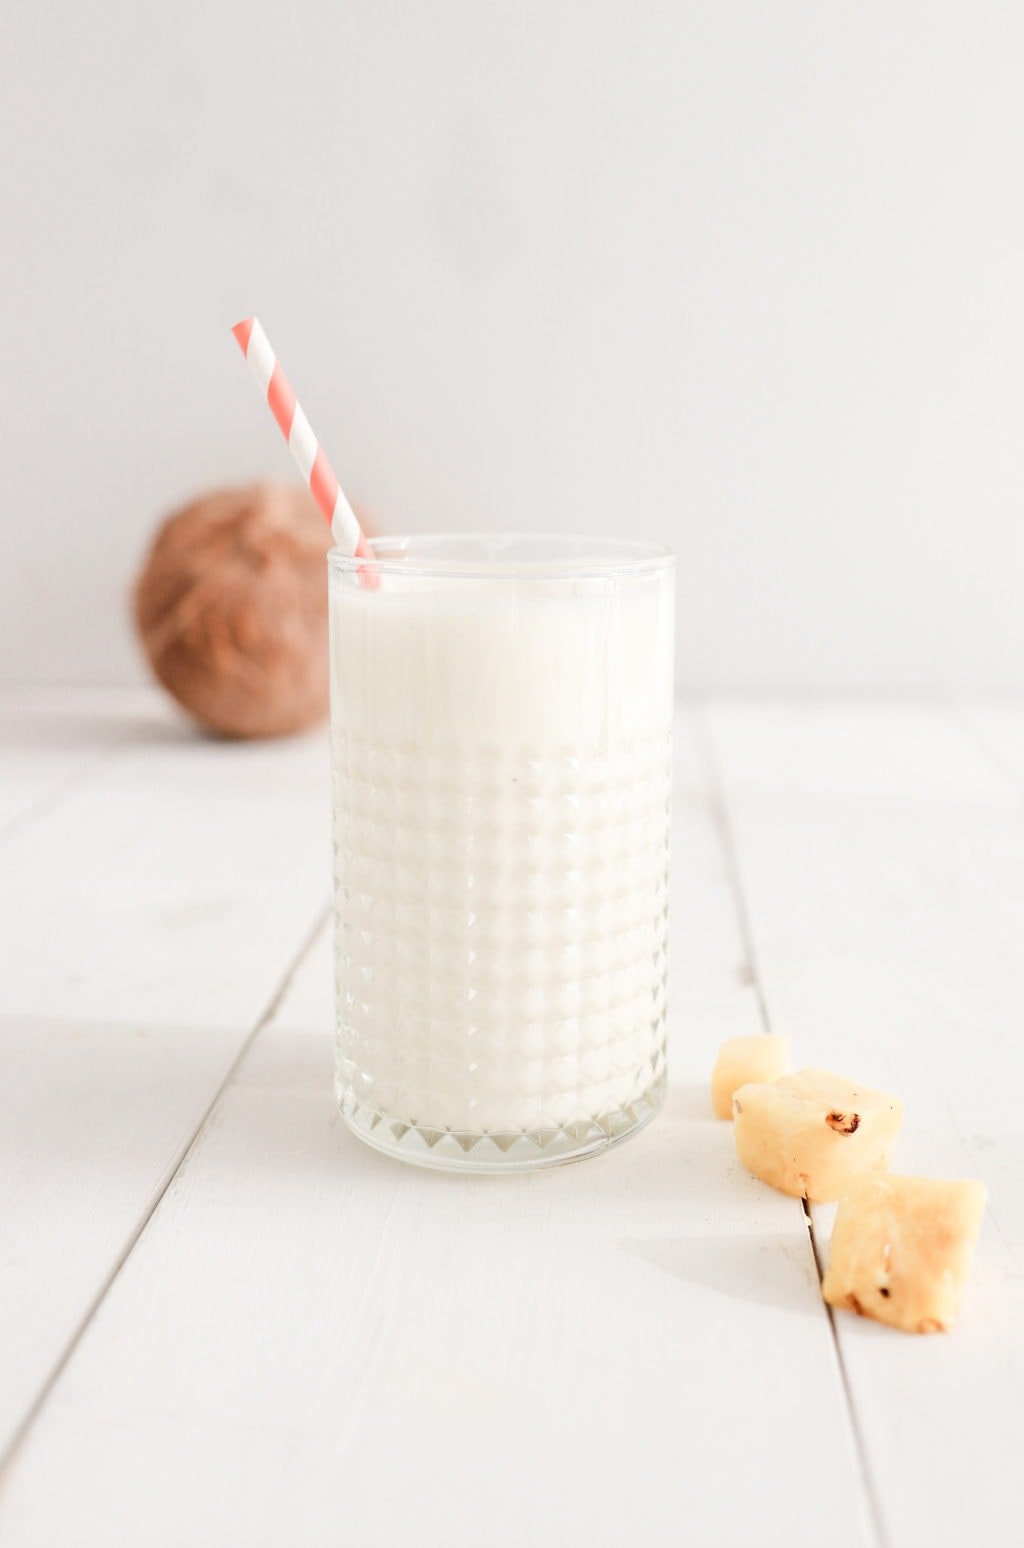 A pina colada smoothie in a glass with a pink and white striped straw on a white surface with pineapple chunks beside it and a coconut in the background. Ingredients include coconut milk, pineapple, banana, and plain Greek yogurt